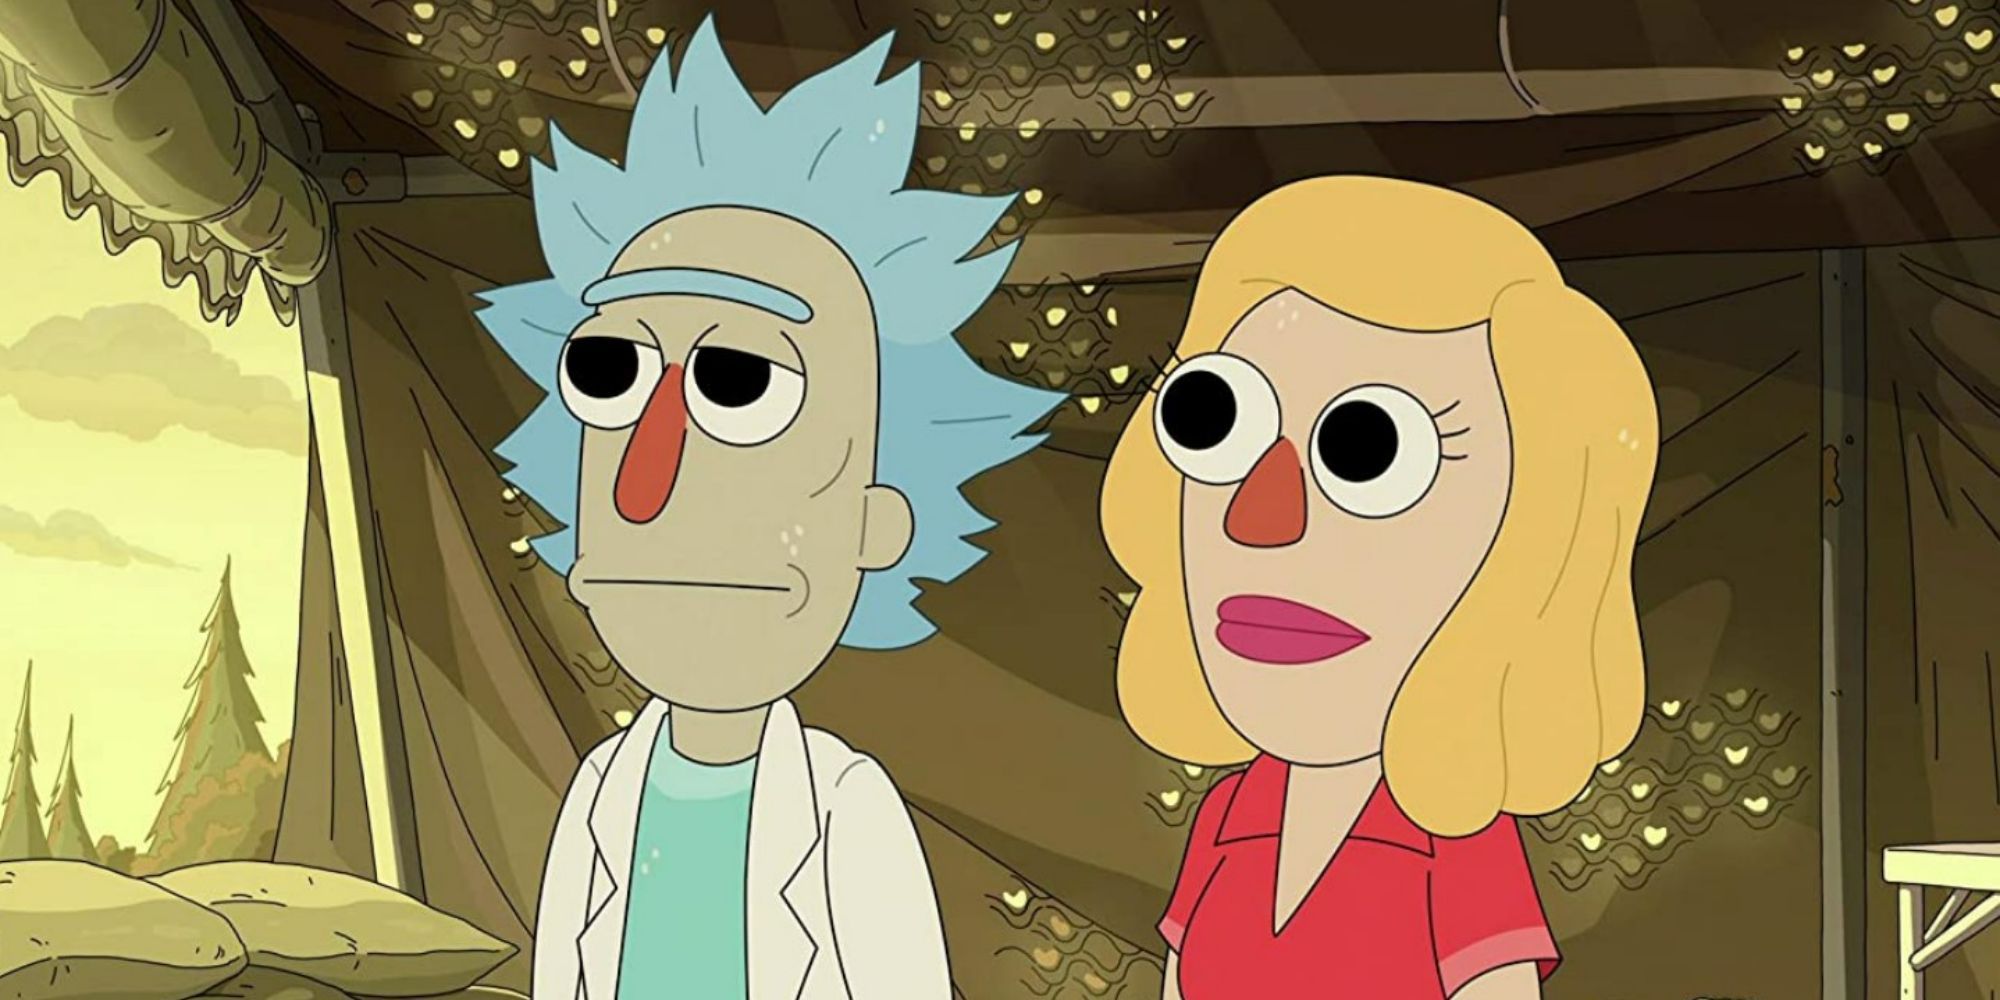 Doll-like decoy clones of Rick and Beth stare blankly in Rick and Morty